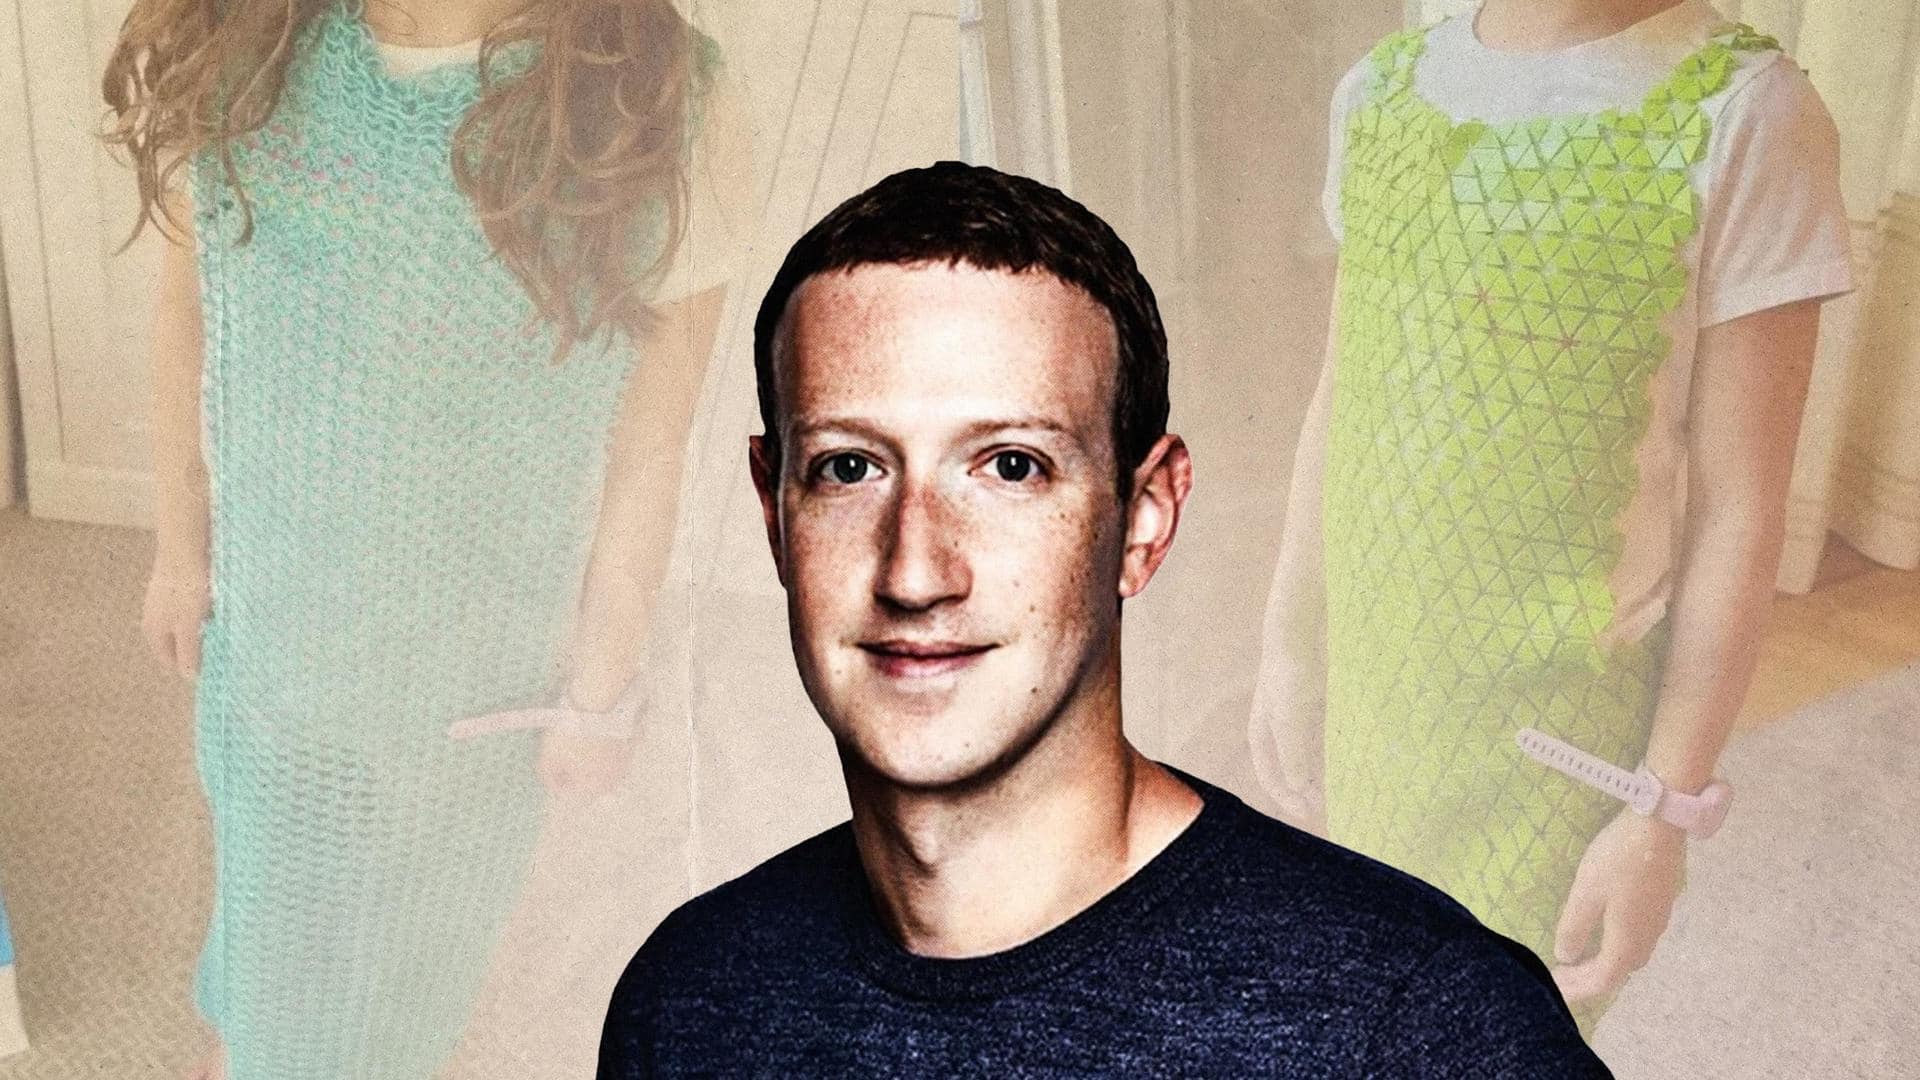 #DadGoals: Mark Zuckerberg learns sewing, makes 3D-printed dresses for daughters